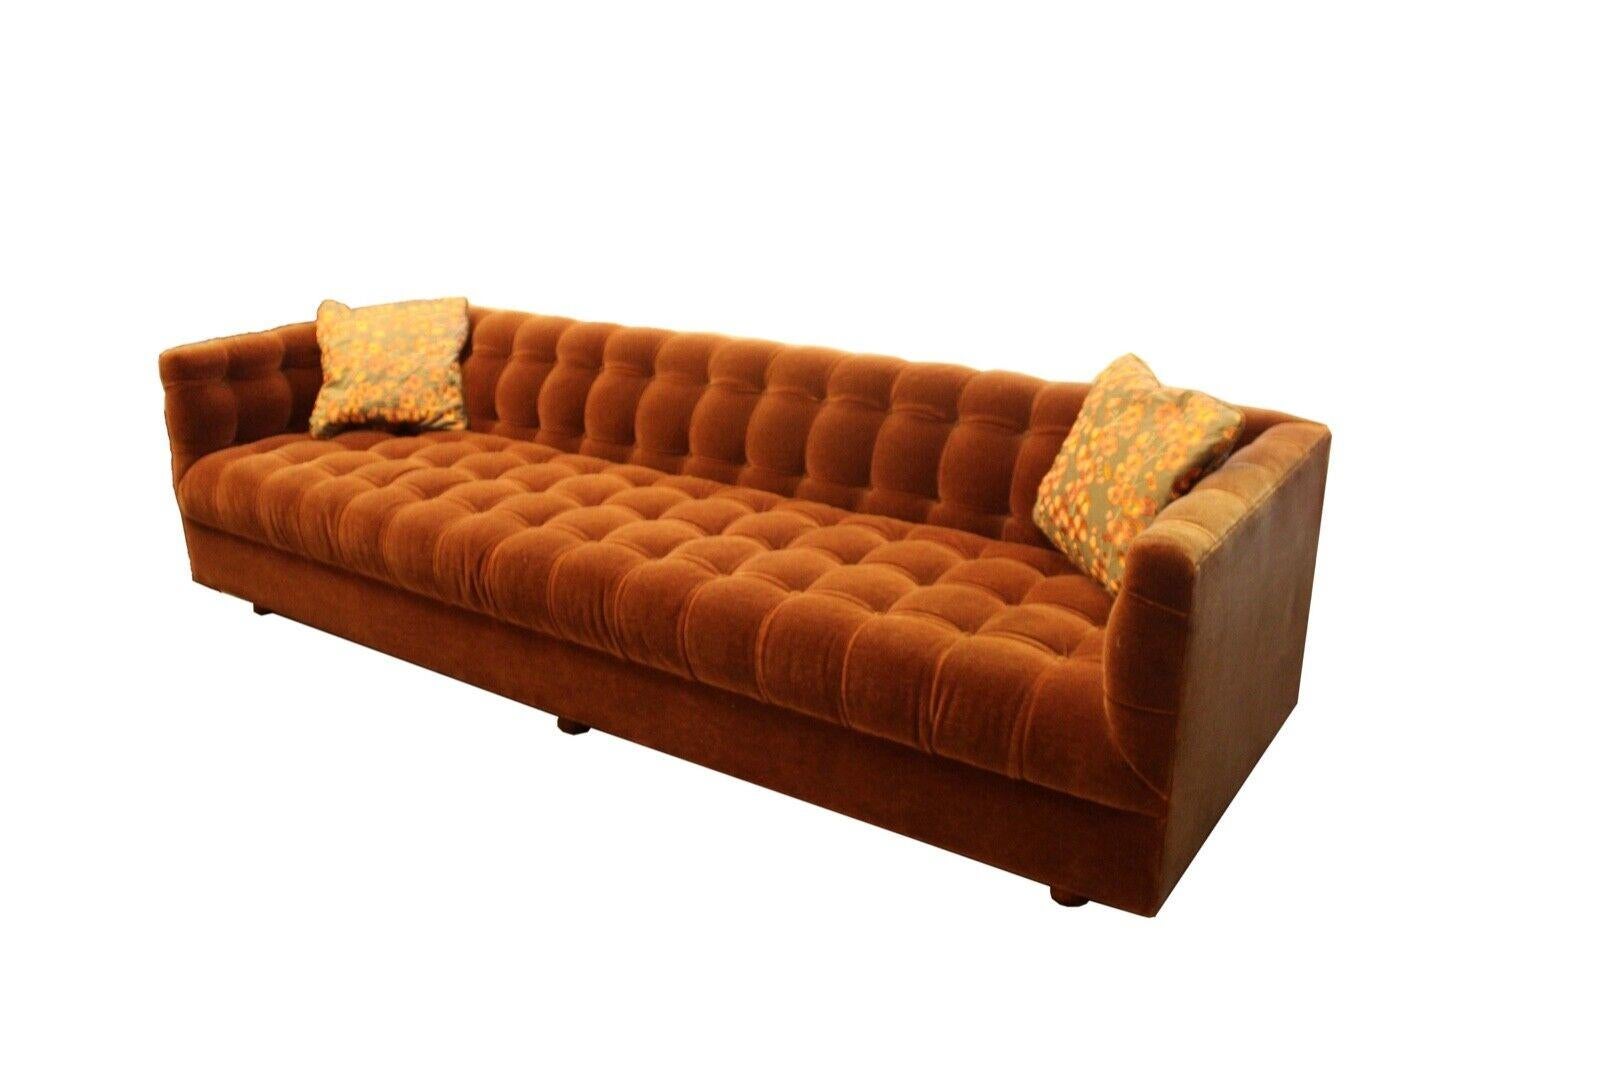 Le Shoppe Too presents this beautiful mohair rust colored tufted sofa attributed to either Harvey Probber or Dunbar. Has slight sun fading on the back of the sofa, shown in pics. In very good vintage condition. Dimensions: 96